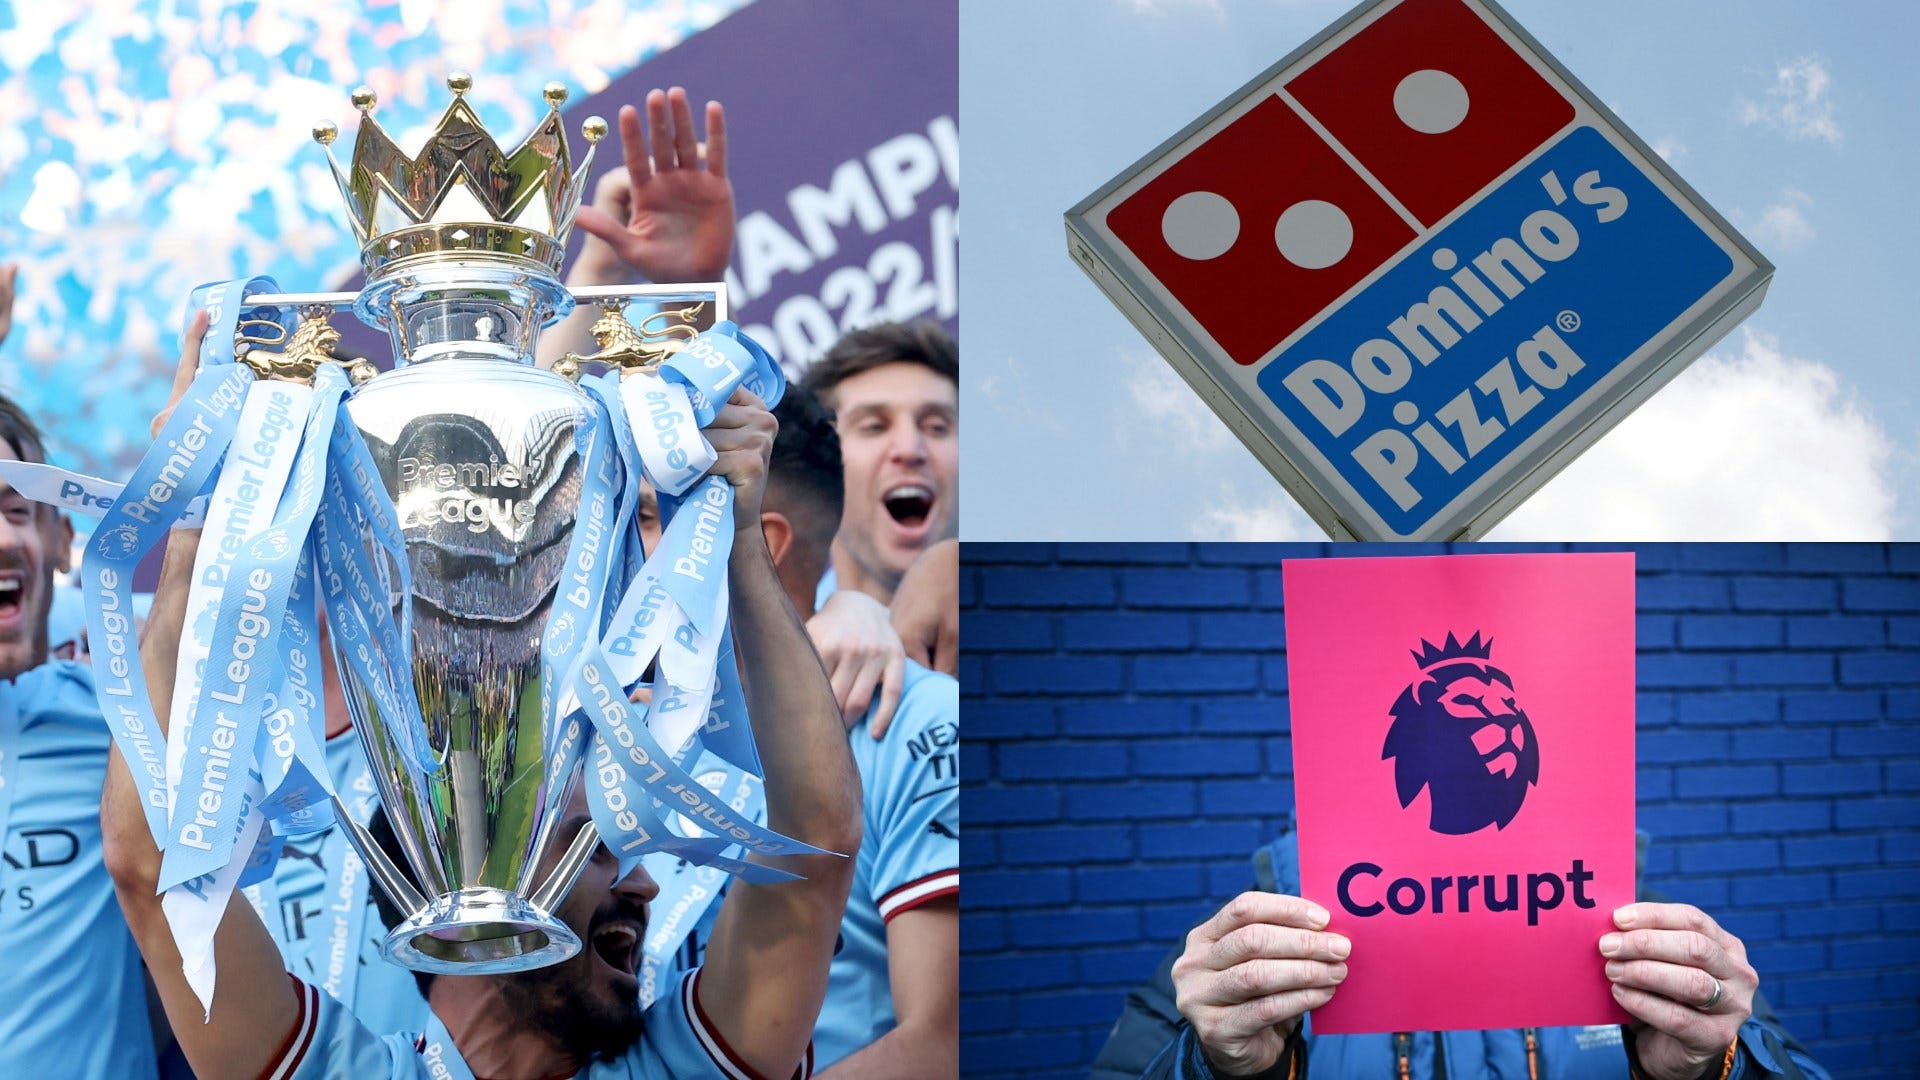 Man City brutally trolled by Domino's Pizza after Premier League hand Nottingham Forest points deduction